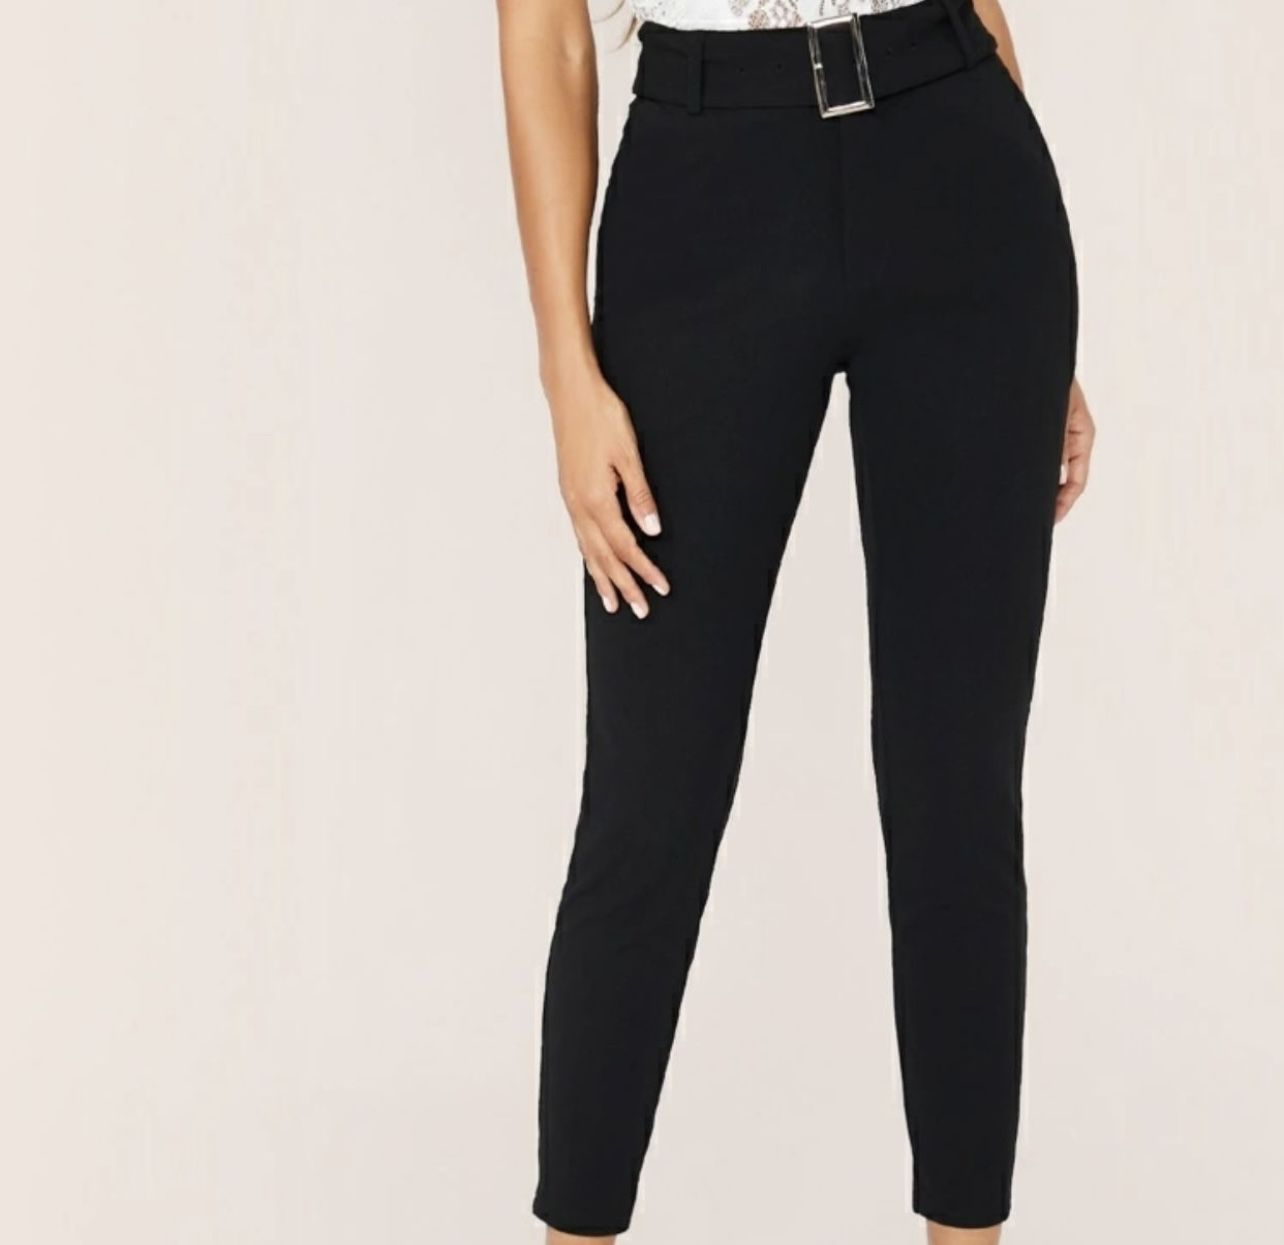 Office pants high waist high rise mid waist ankle pants belted pants leggings